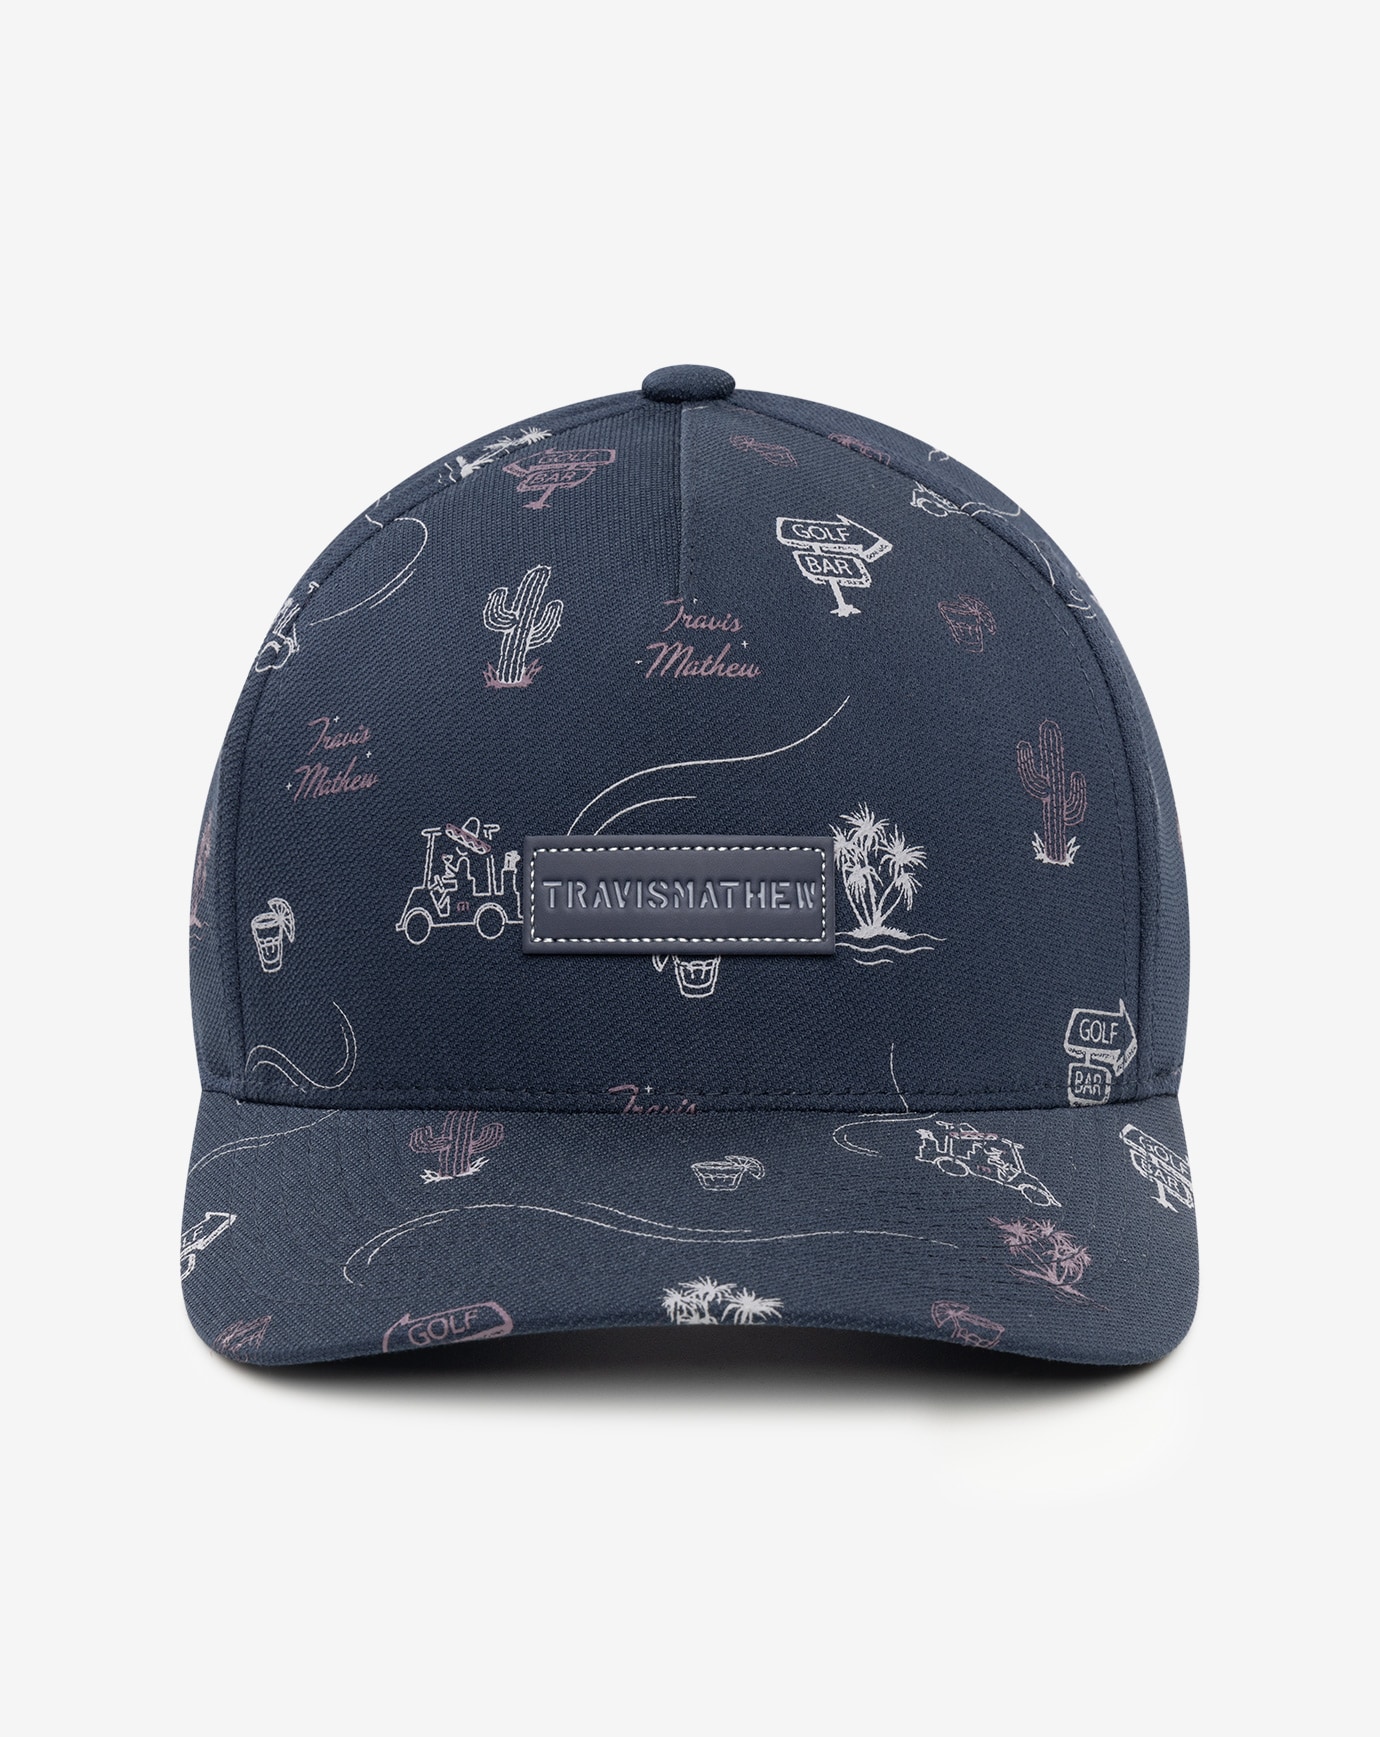 Related Product - DROP IN THE OCEAN SNAPBACK HAT